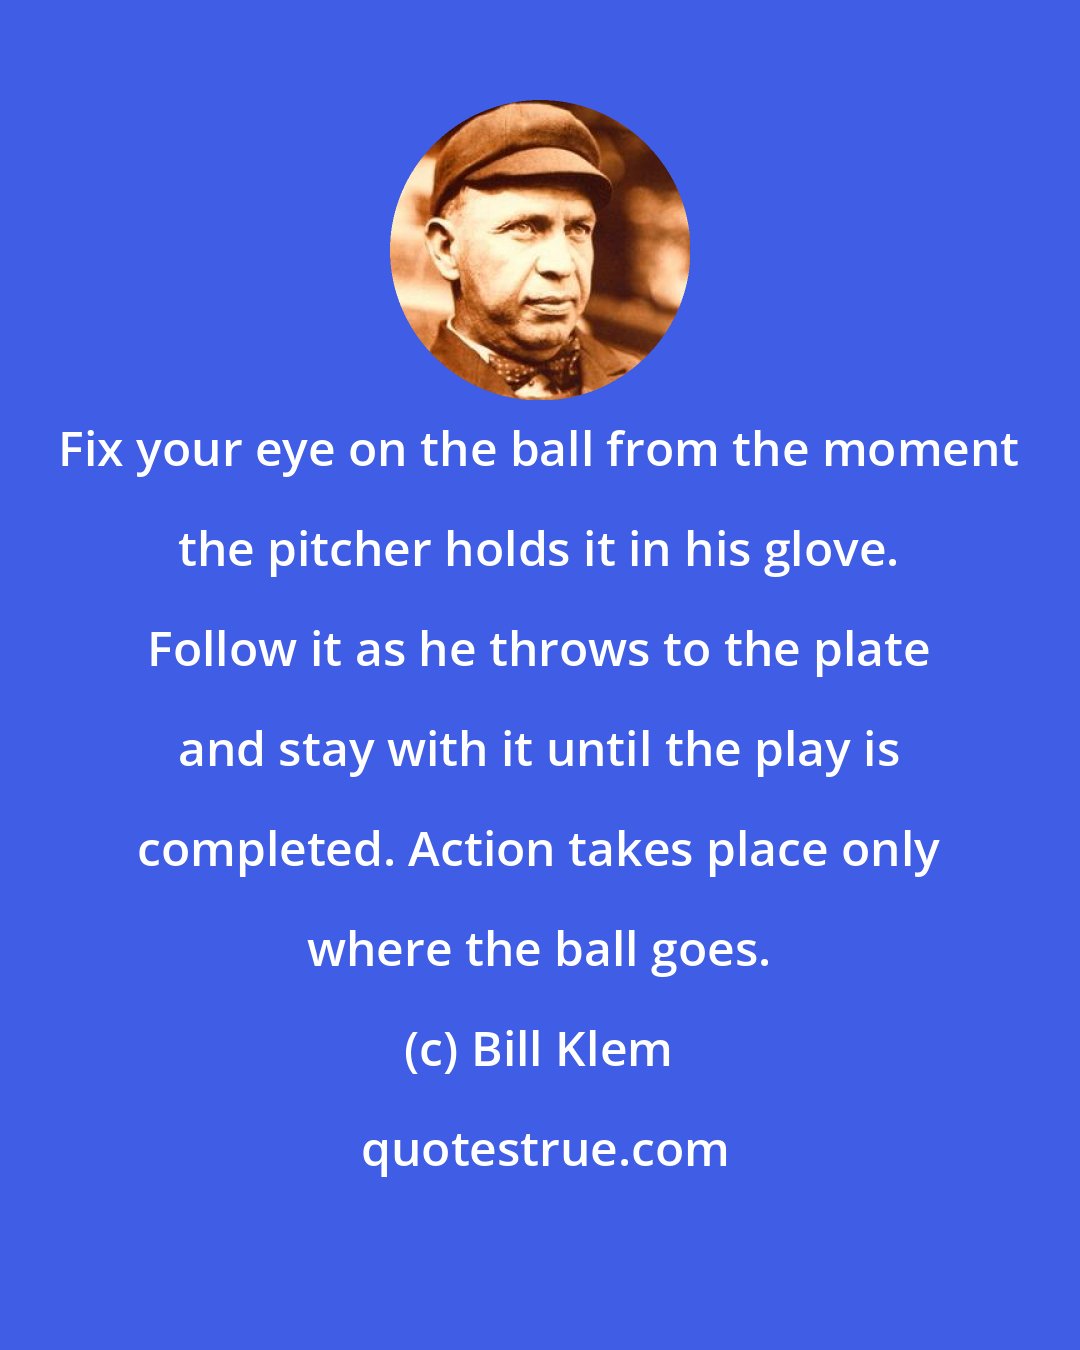 Bill Klem: Fix your eye on the ball from the moment the pitcher holds it in his glove. Follow it as he throws to the plate and stay with it until the play is completed. Action takes place only where the ball goes.